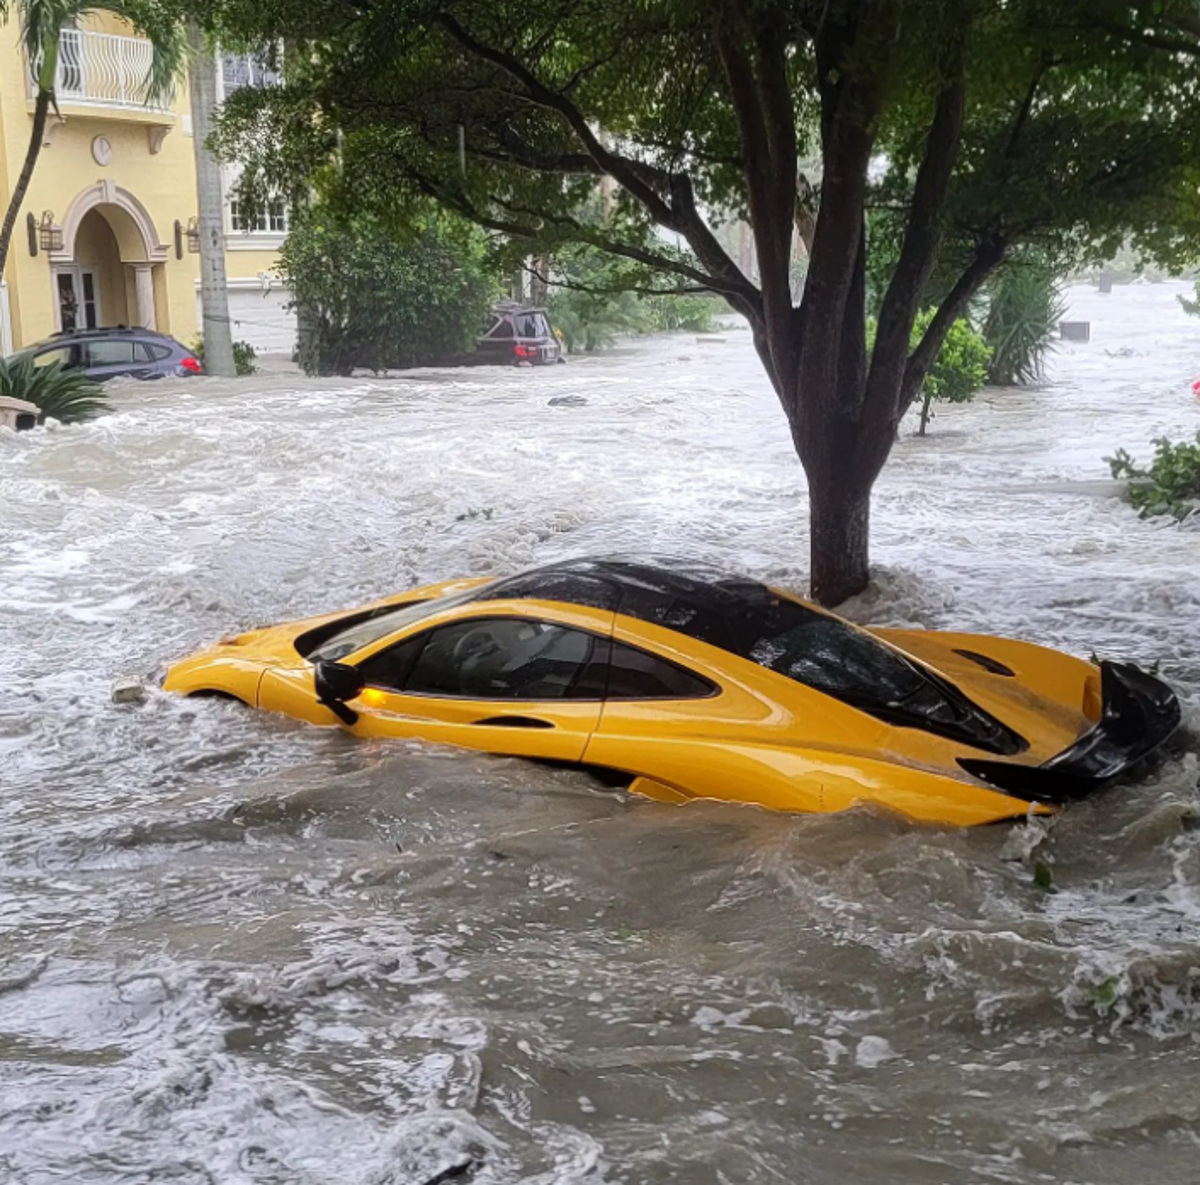 Luxury McLaren car worth over $1m washed out of Florida garage and submerged by Hurricane Ian